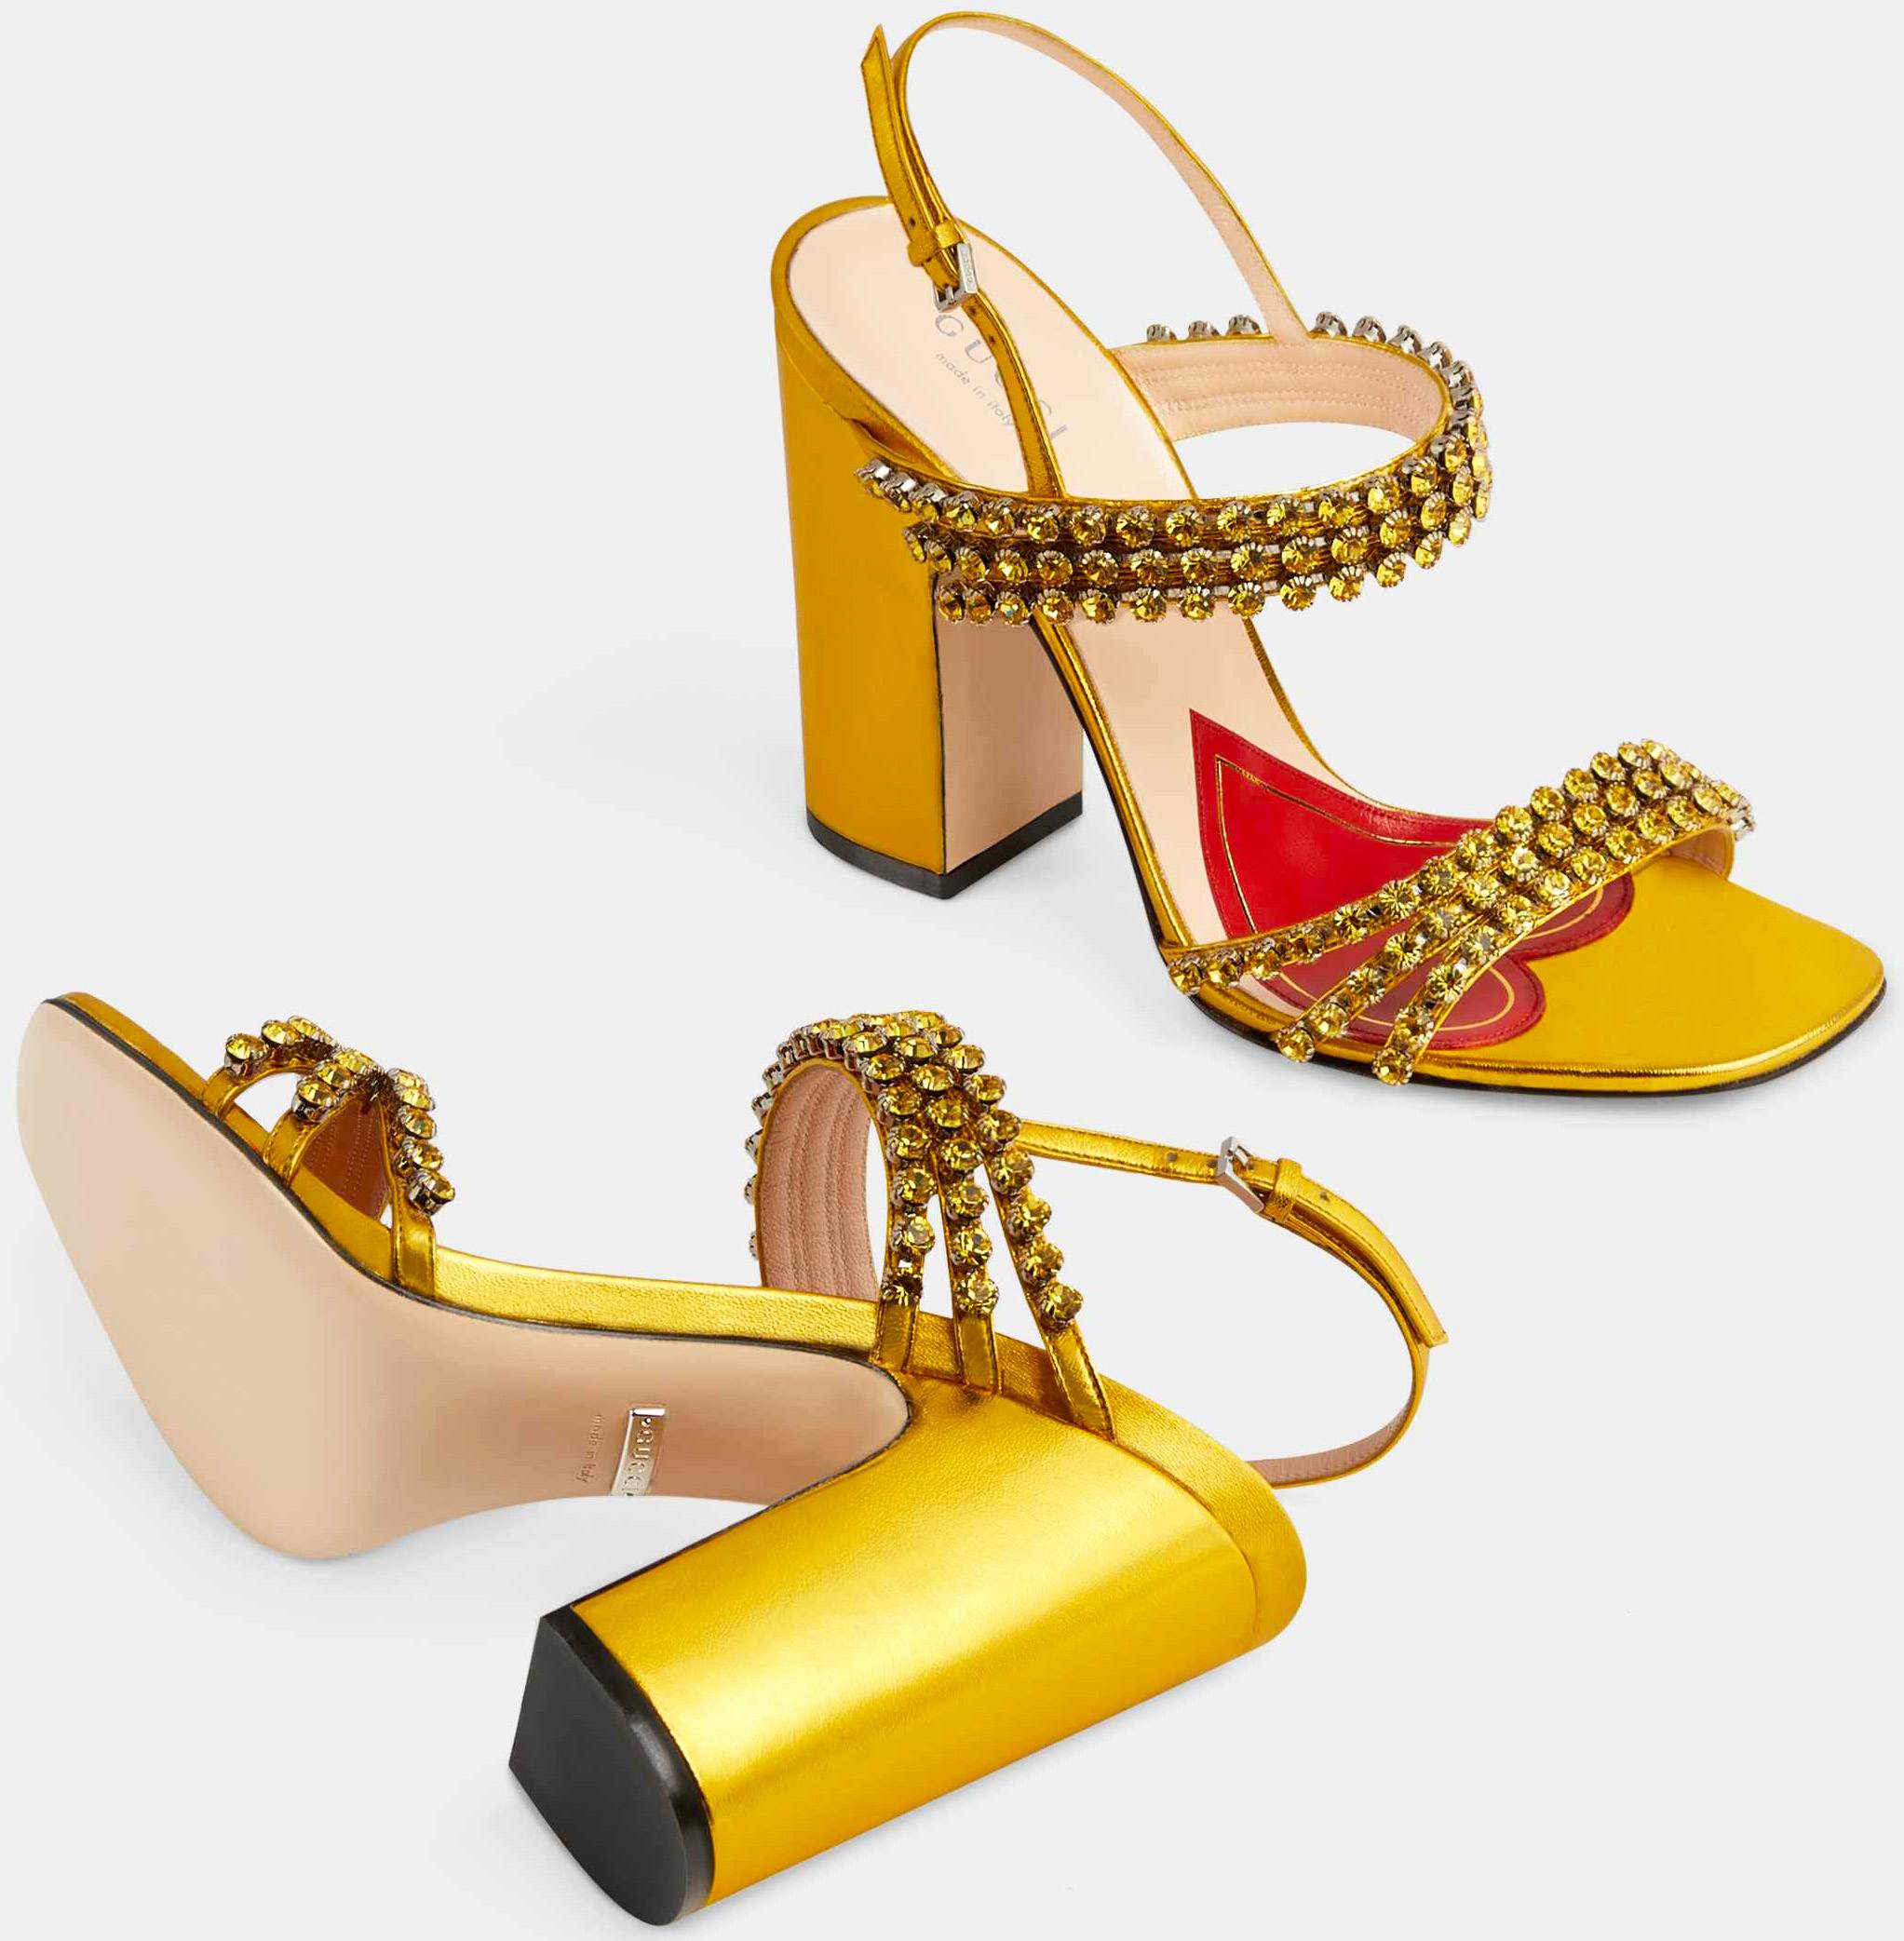 Gucci Metallic Sandal with Crystals in Gold Metallic